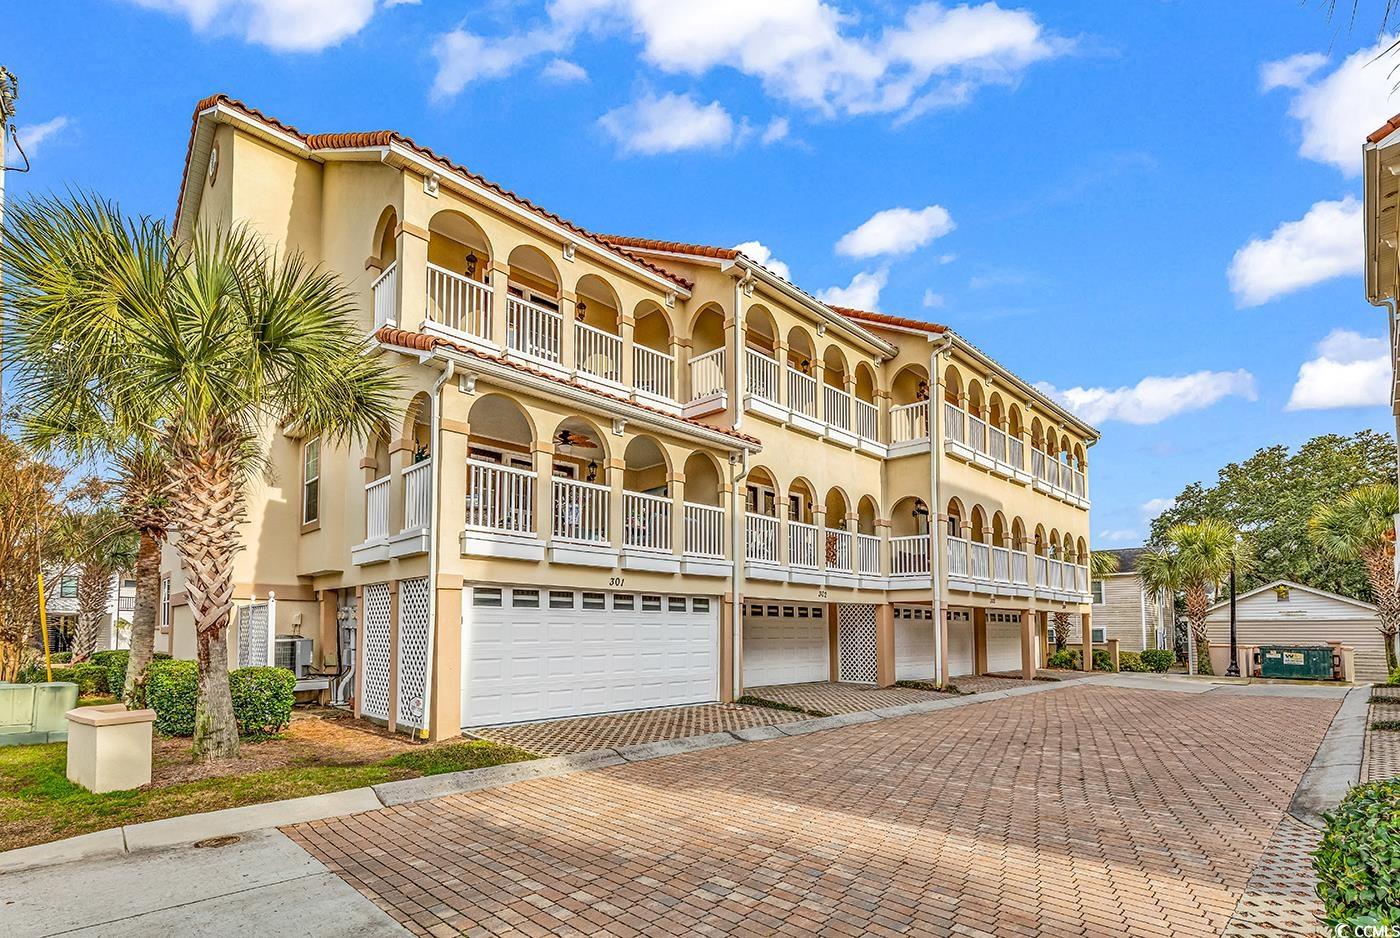 one block to the beach~pool~end unit~ private courtyard~elevator~large balcony!! this condo offers 3br 3.5ba,  new elevator installed(goes from garage to all 3 floors)! this stunning condo just a couple blocks from the famous od/ main street where all the fun entertainment, live music, restaurant's, the od pavilion on the beach, hotos, spanish galleon, and where the famous shag dance was born! this incredible condo boast a beautifully renovated kitchen to include: new cabinetry~ quartz counters~ flooring~ and new light fixtures! the renovated bathrooms included updated countertops, fixtures & flooring! there is new flooring throughout (lvp installed 2021). the hvac was replaced in 2019 and consistently maintained by dews heating and air! the three bedrooms are all spacious with large closets and a private bath! the master bedroom has a balcony where you can sit in the morning or evenings and enjoy the sunsets and big sky views! one of the guest bedrooms is located on the first floor and the other two bedrooms are on the upper floor. the elevator is located inside and goes from the garage to the lr and the upper floor! this is the original builders personal unit and the upgrades show it! the balcony is much larger than the other units and it is located just off the living room. the living room is spacious and has a lot of natural light from the wall of windows overlooking the balcony. the cozy fireplace has built in shelving which is wonderful for displaying your cherished collectables!! plantation shutters are installed on the windows! if you enjoy sitting outside and listening to the ocean waves you'll love the oversized private courtyard which faces east and gets lovely sunlight! the new epoxy garage floor makes the garage area clean and gives this space a bright and airy feel! the garage has ample space to park and has a nook where a a refrigerator stays and supplies can be stored and out of the way. there is a large storage closet in the back of the garage which is great to store your beach supplies! coakley baye has a total of 11 units which gives this complex a quaint feel. the pool is just across the driveway and is a great place to relax or cool off! only the owners/guest of the 11 units have access to the pool. the complex has approximately 5 guest parking spots and each owner has a private garage they use. this mediterranean style exterior has a beautiful terracotta tile roof and stucco siding. each owner has a private courtyard and balcony which adds to the mediterranean vibes:) come enjoy the "salt life" in style with this incredible, spacious, and updated condo! address: 400 hillside dr. unit #301 north myrtle beach sc 29582! see matterport virtual tour!!